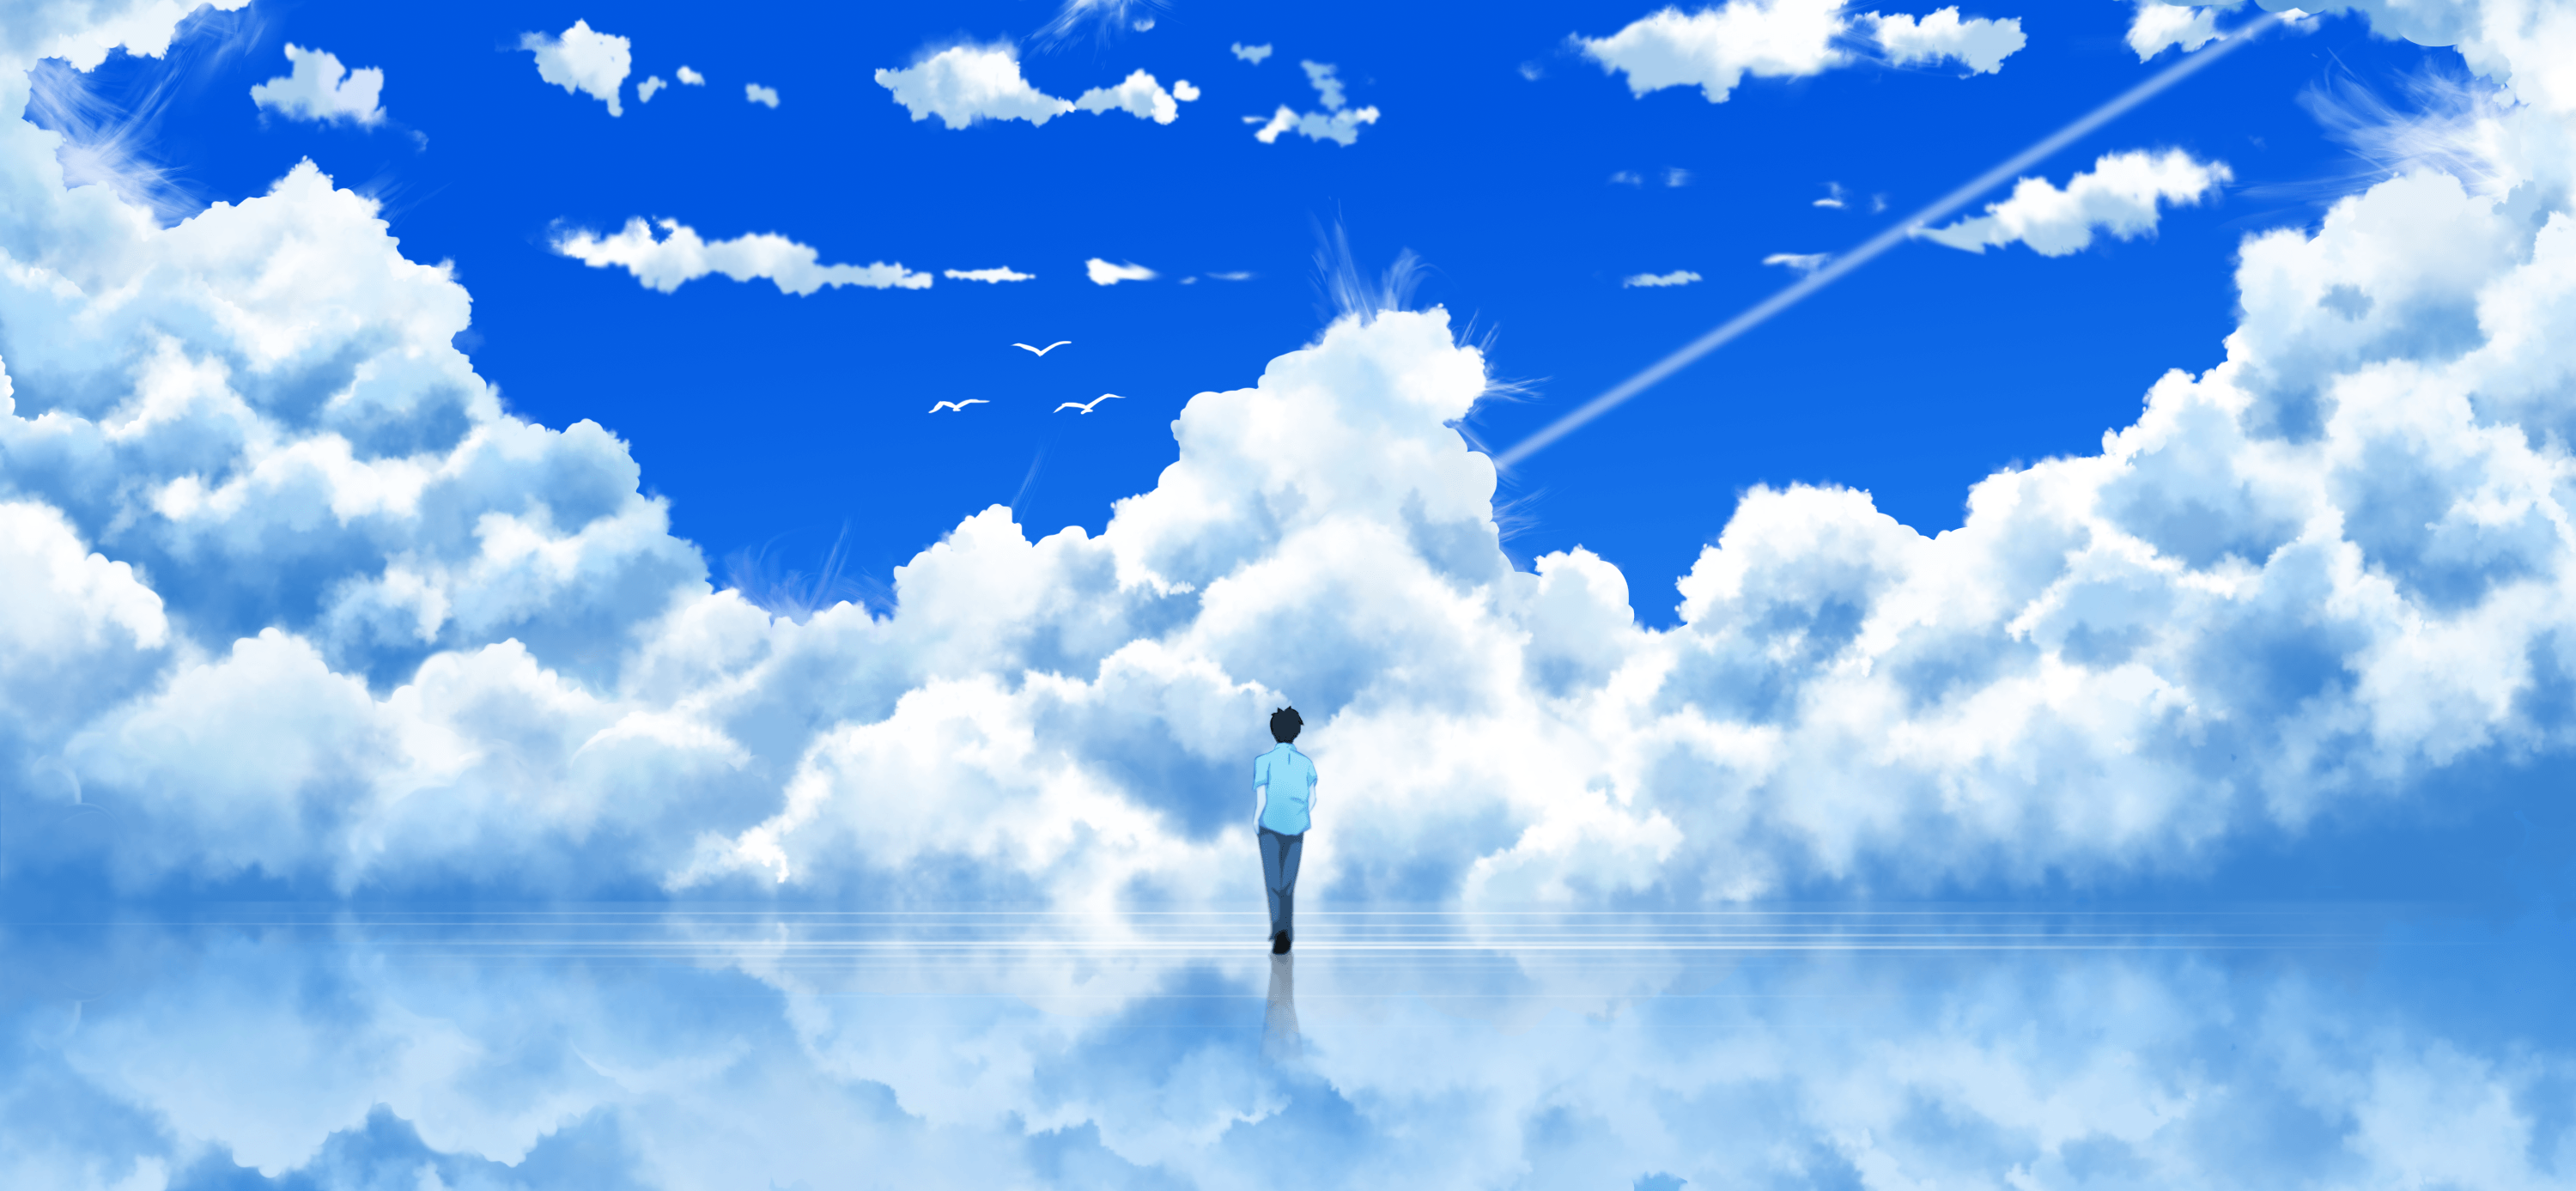 Peaceful Anime Wallpaper (80+ images)